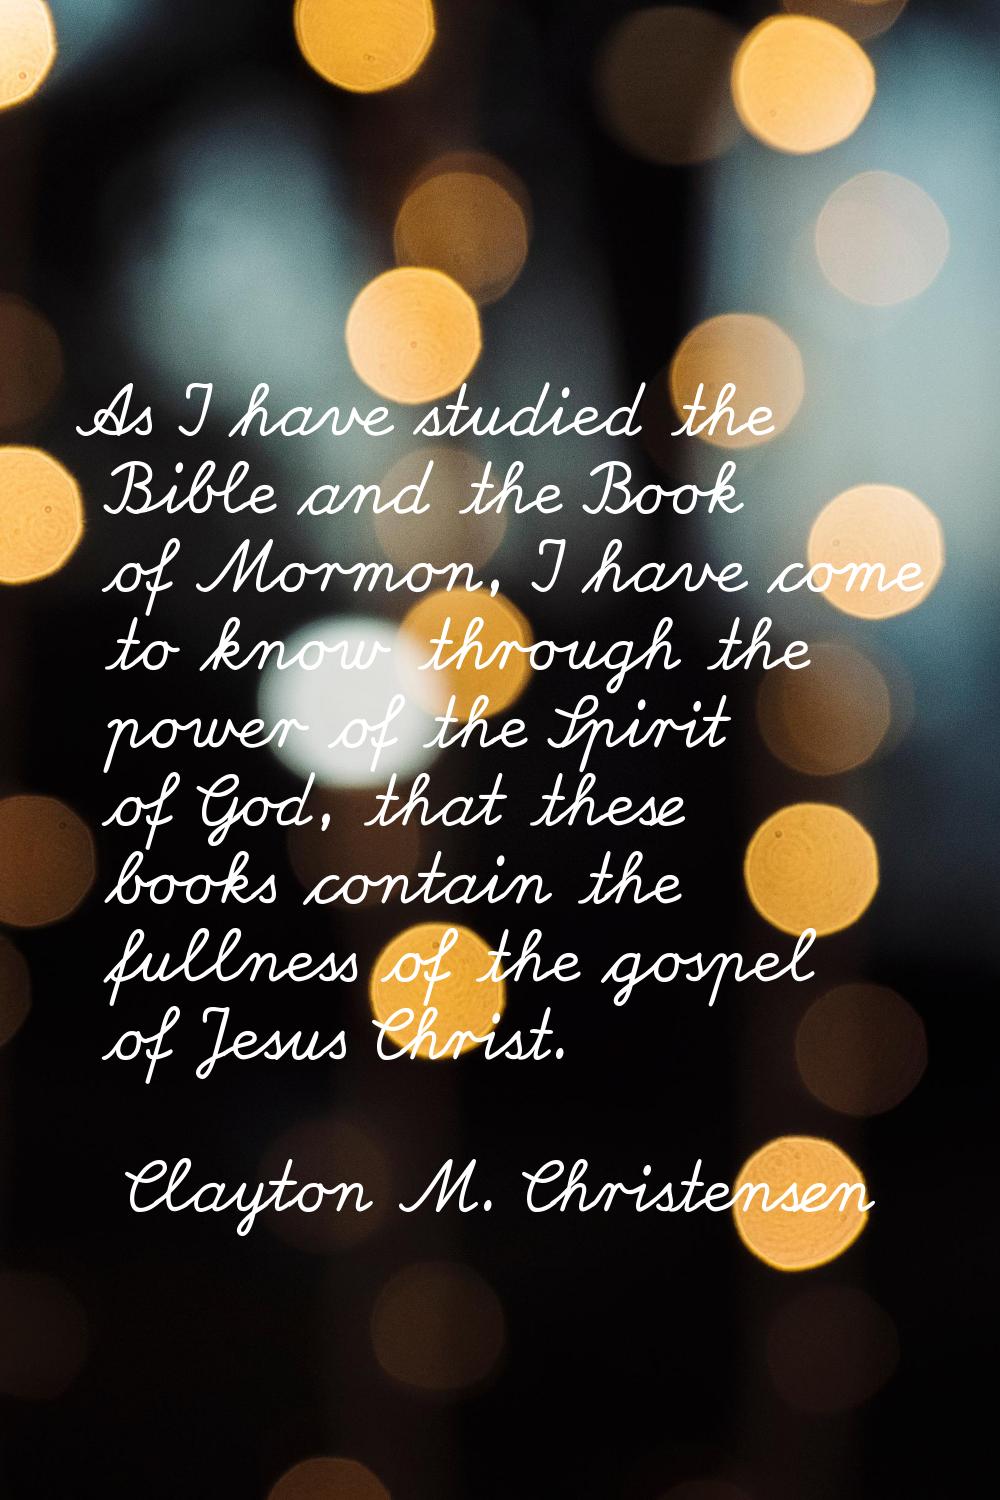 As I have studied the Bible and the Book of Mormon, I have come to know through the power of the Sp